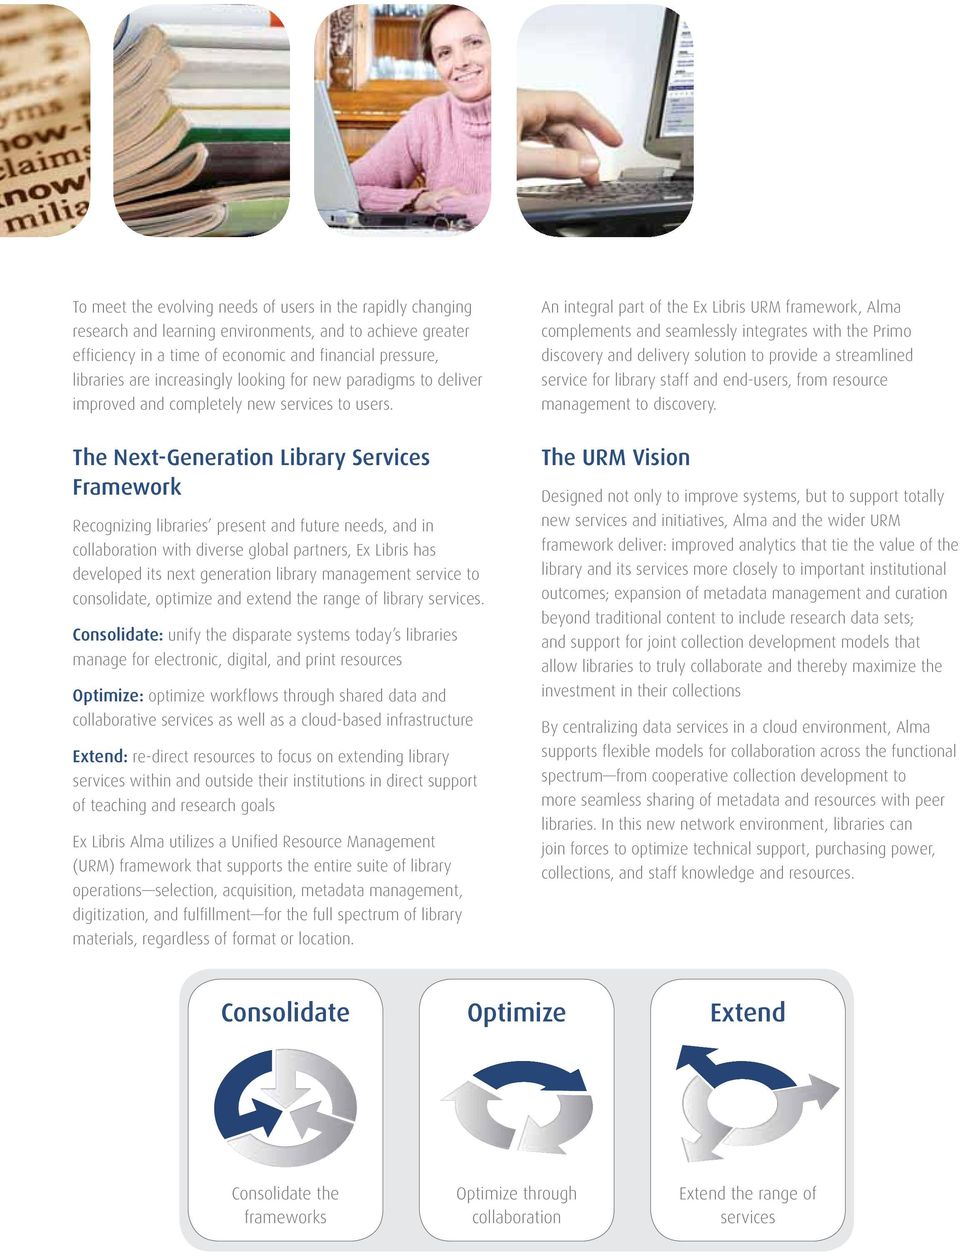 An integral part of the Ex Libris URM framework, Alma complements and seamlessly integrates with the Primo discovery and delivery solution to provide a streamlined service for library staff and